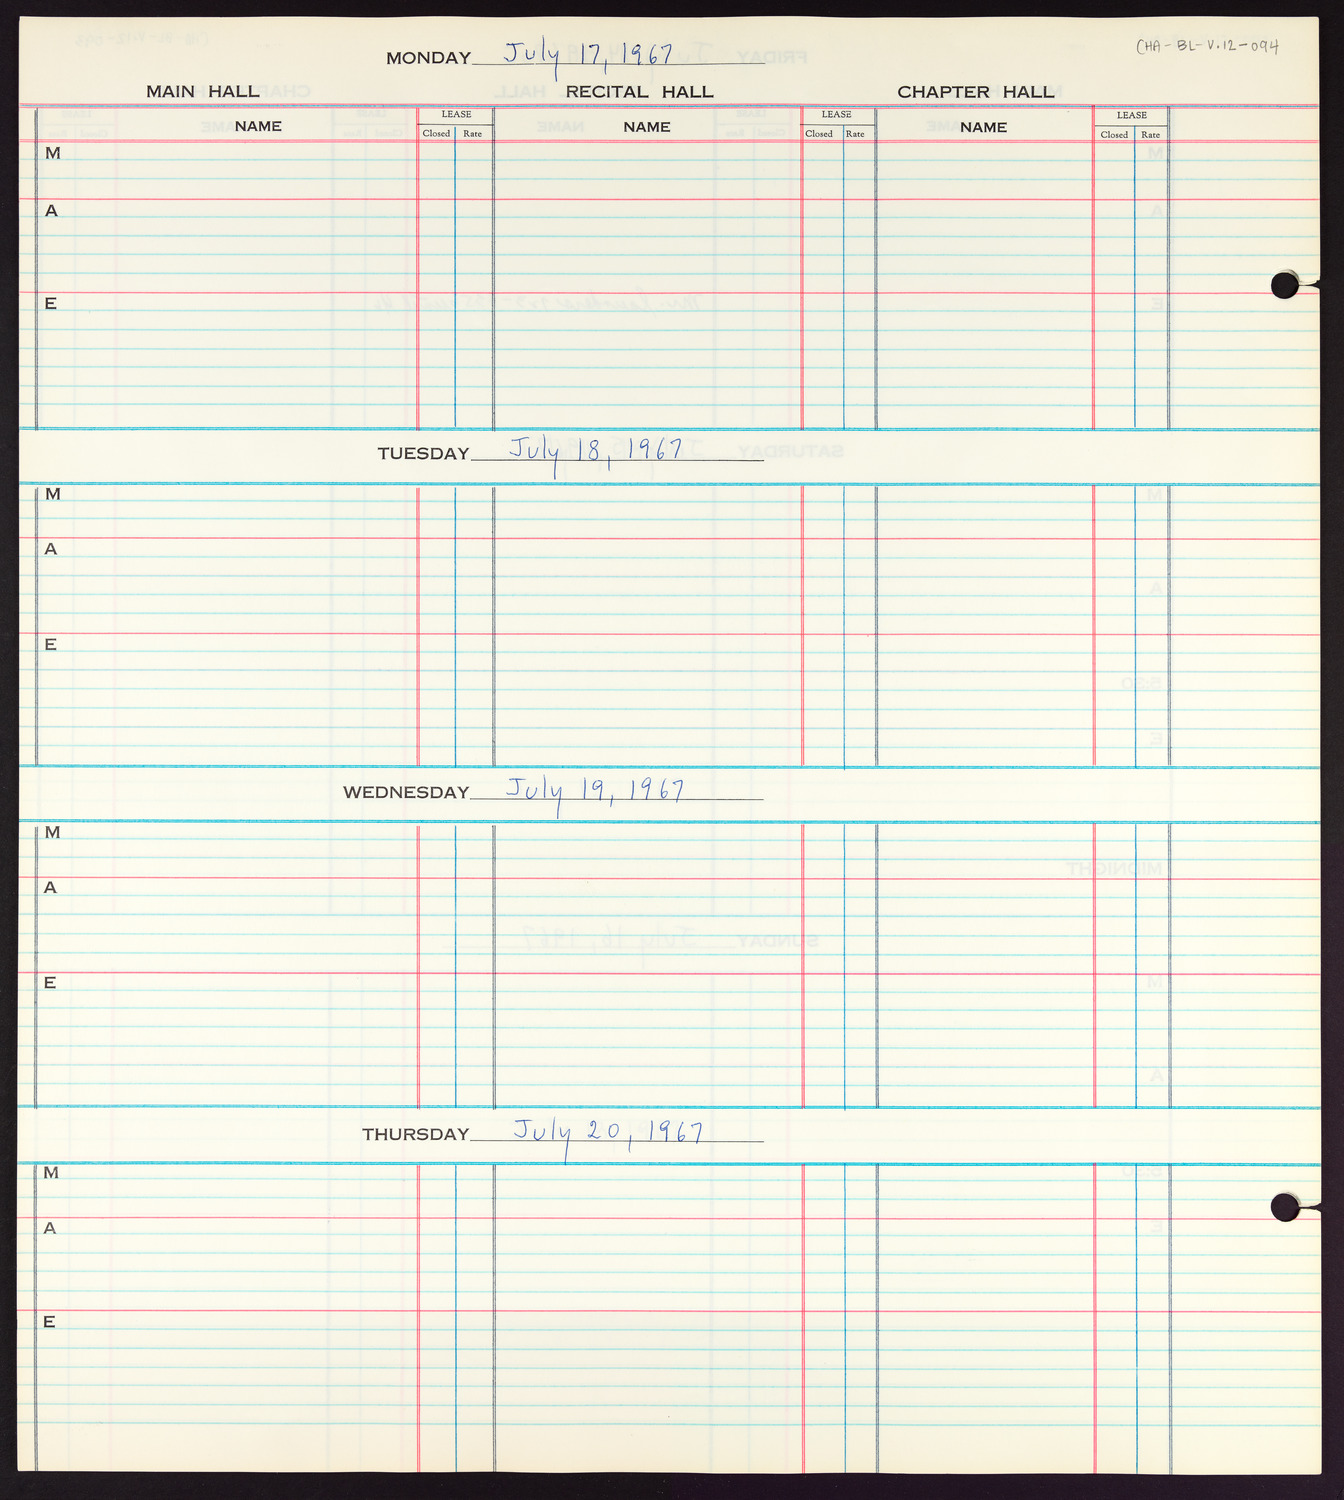 Carnegie Hall Booking Ledger, volume 12, page 94